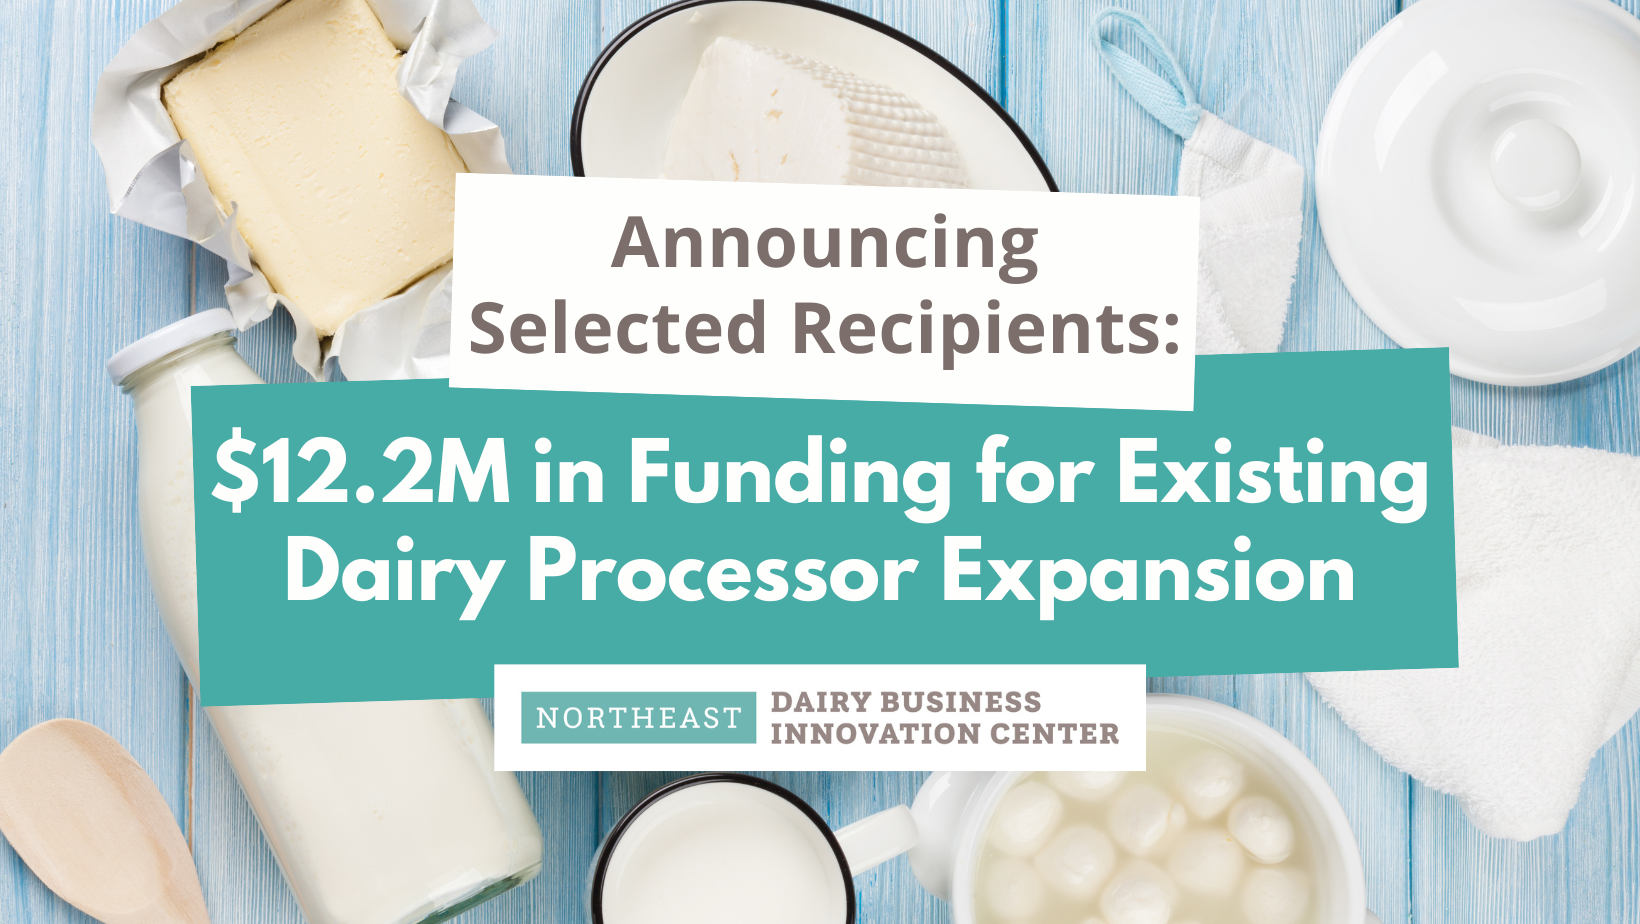 Dairy Processor Expansion Awards